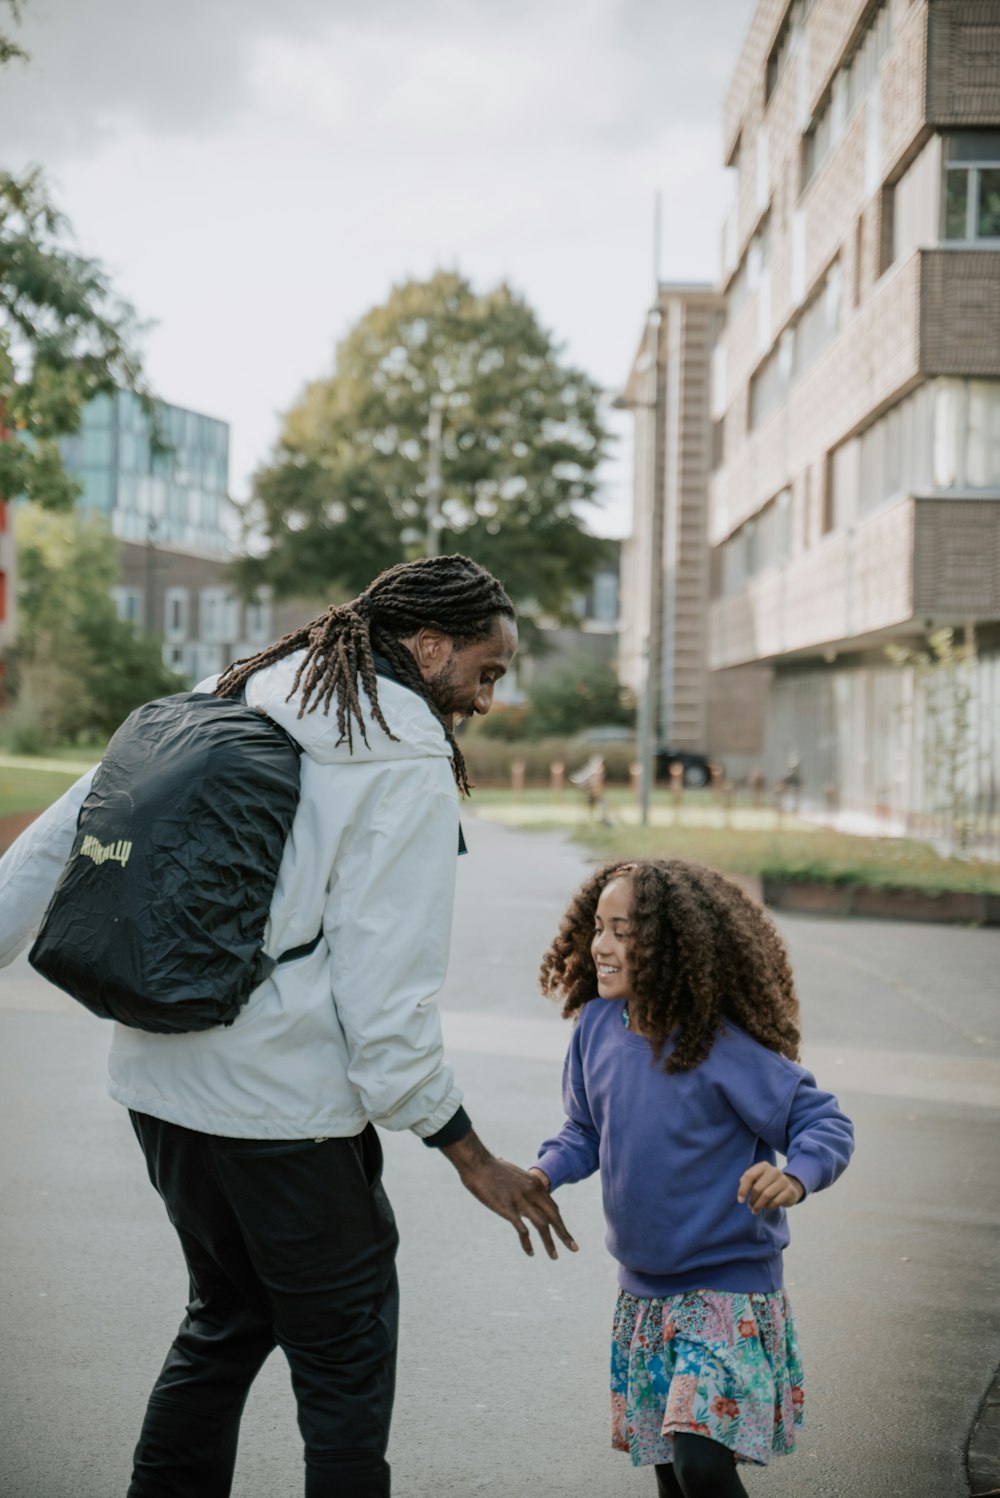 a man with dreadlocks walking with a little girl